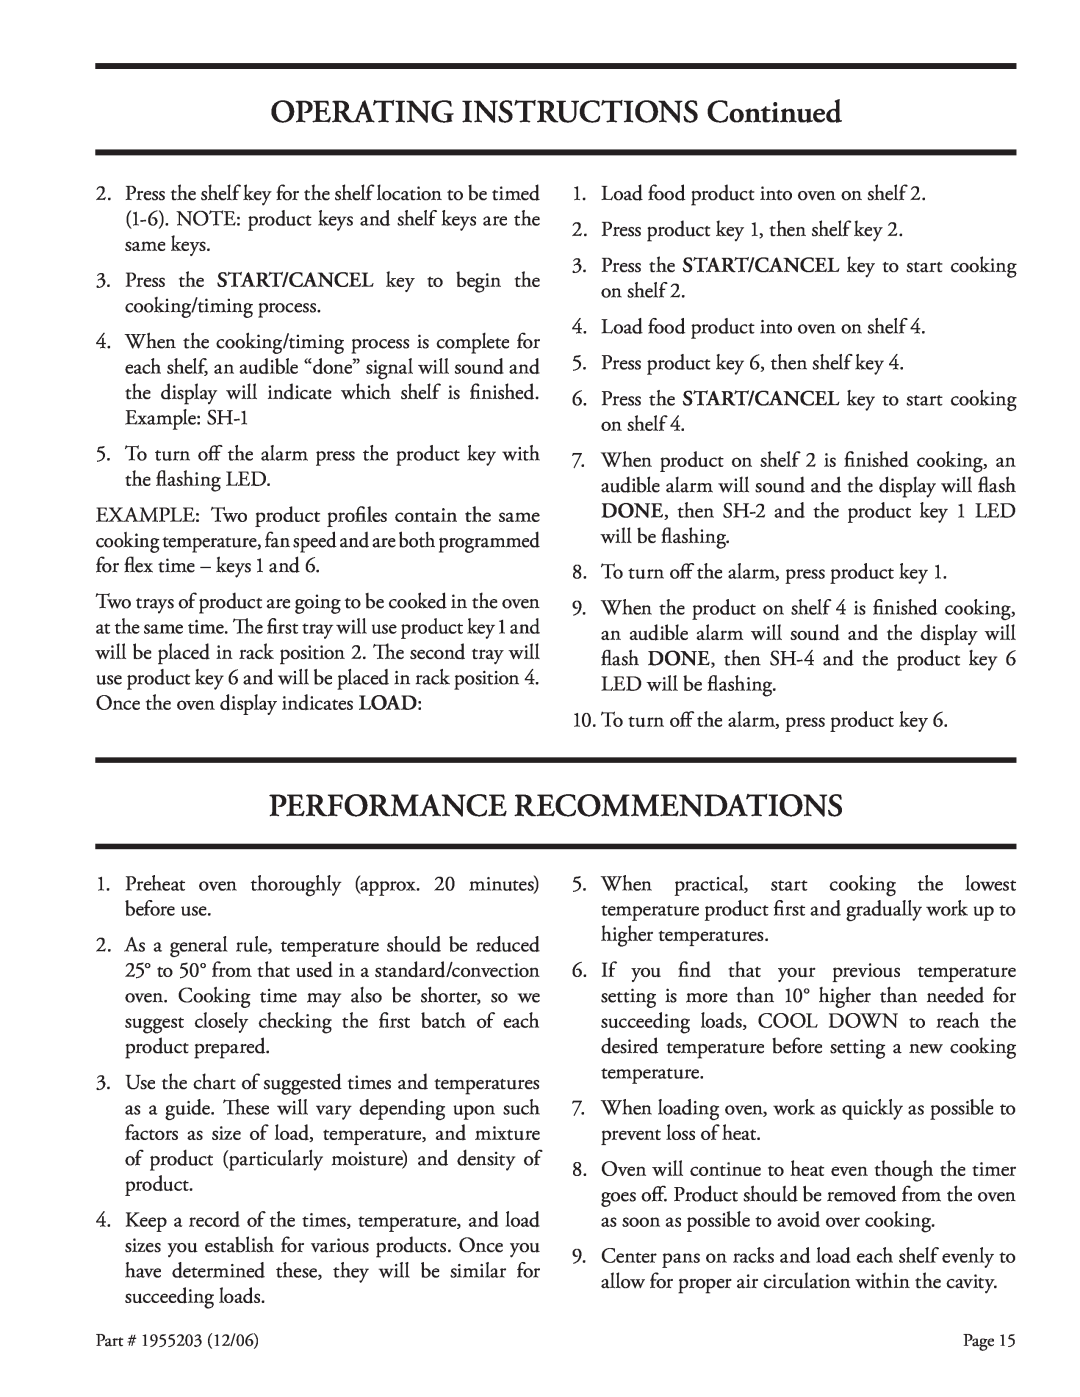 Garland Convection Microwave Oven installation instructions Performance Recommendations, OPERATING INSTRUCTIONS Continued 